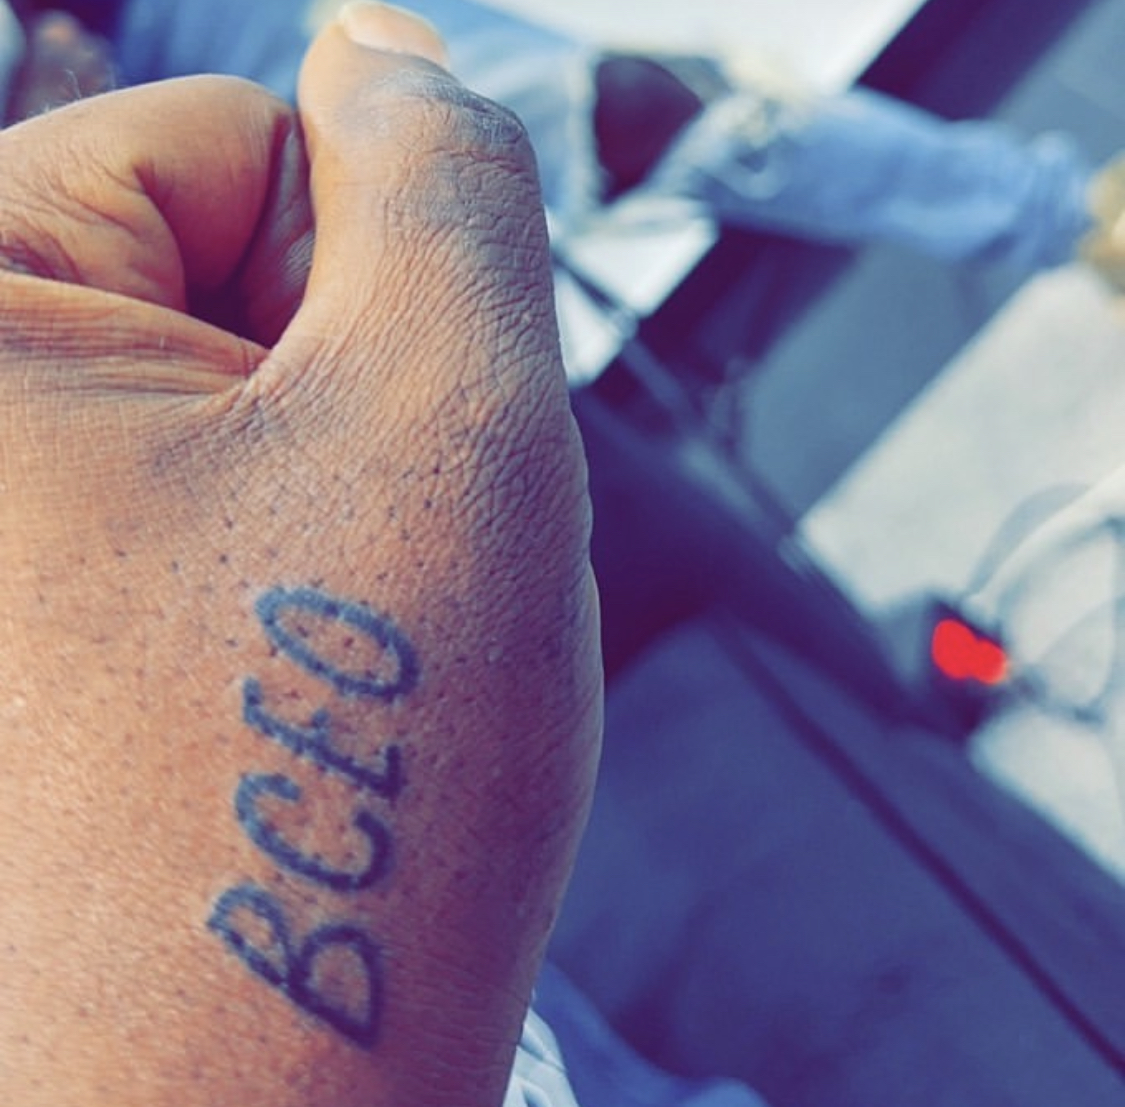 Blessing Okoro reportedly dating IVD as he tattoos her name on his hand few months after wife’s death [photos]